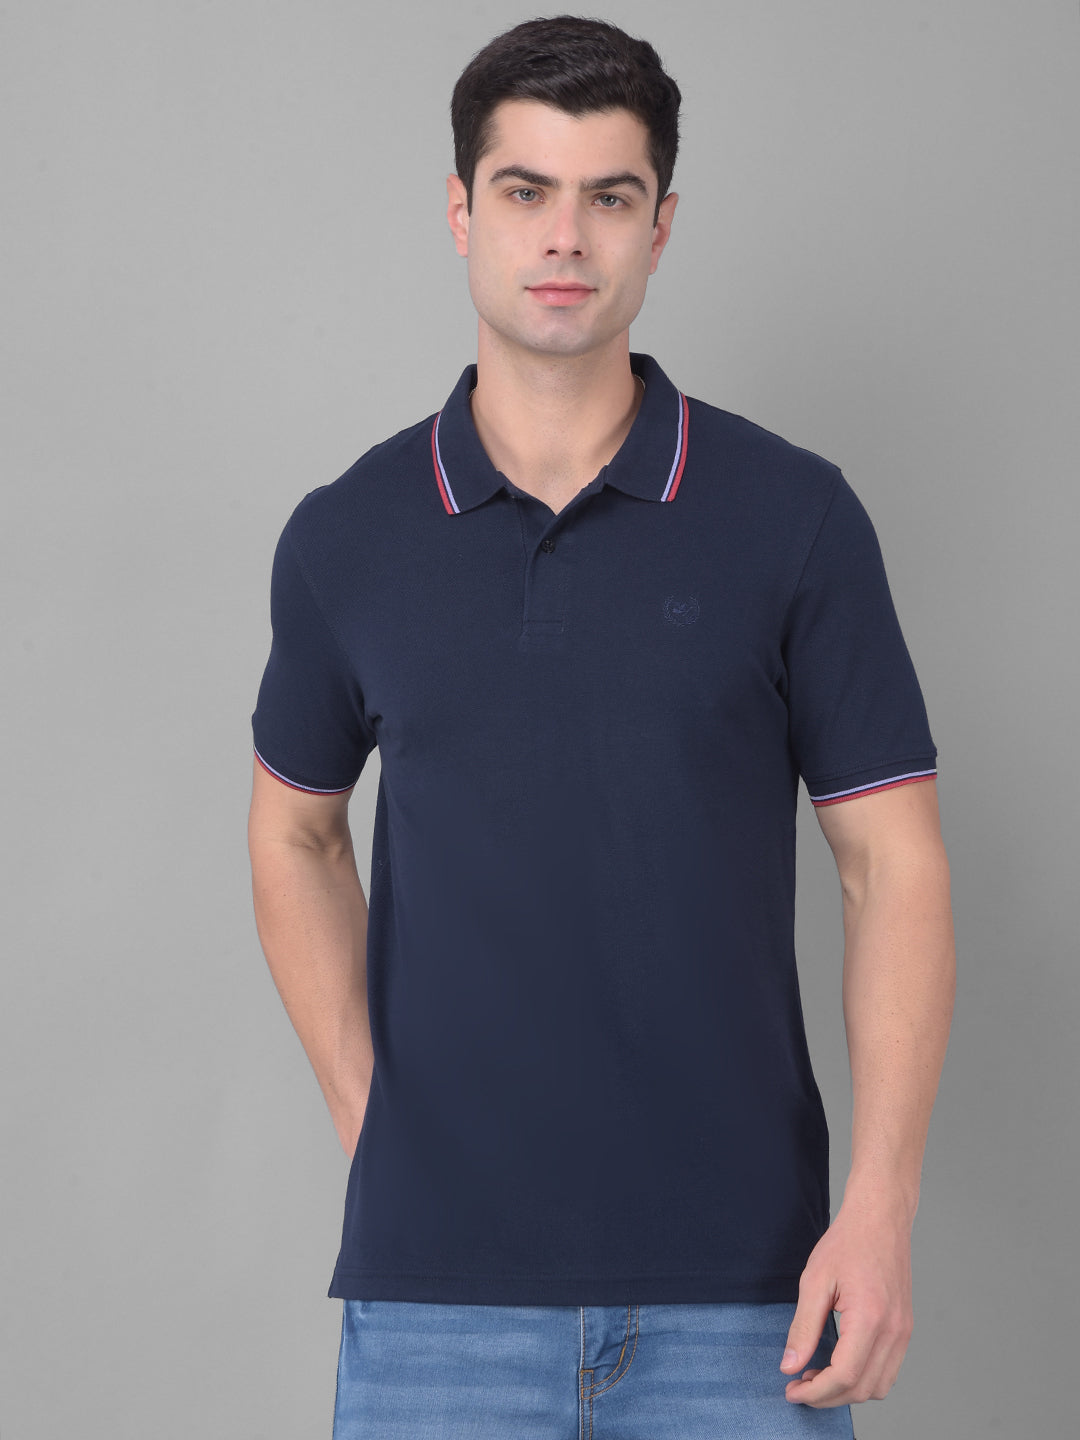 cobb solid navy blue polo neck t-shirt